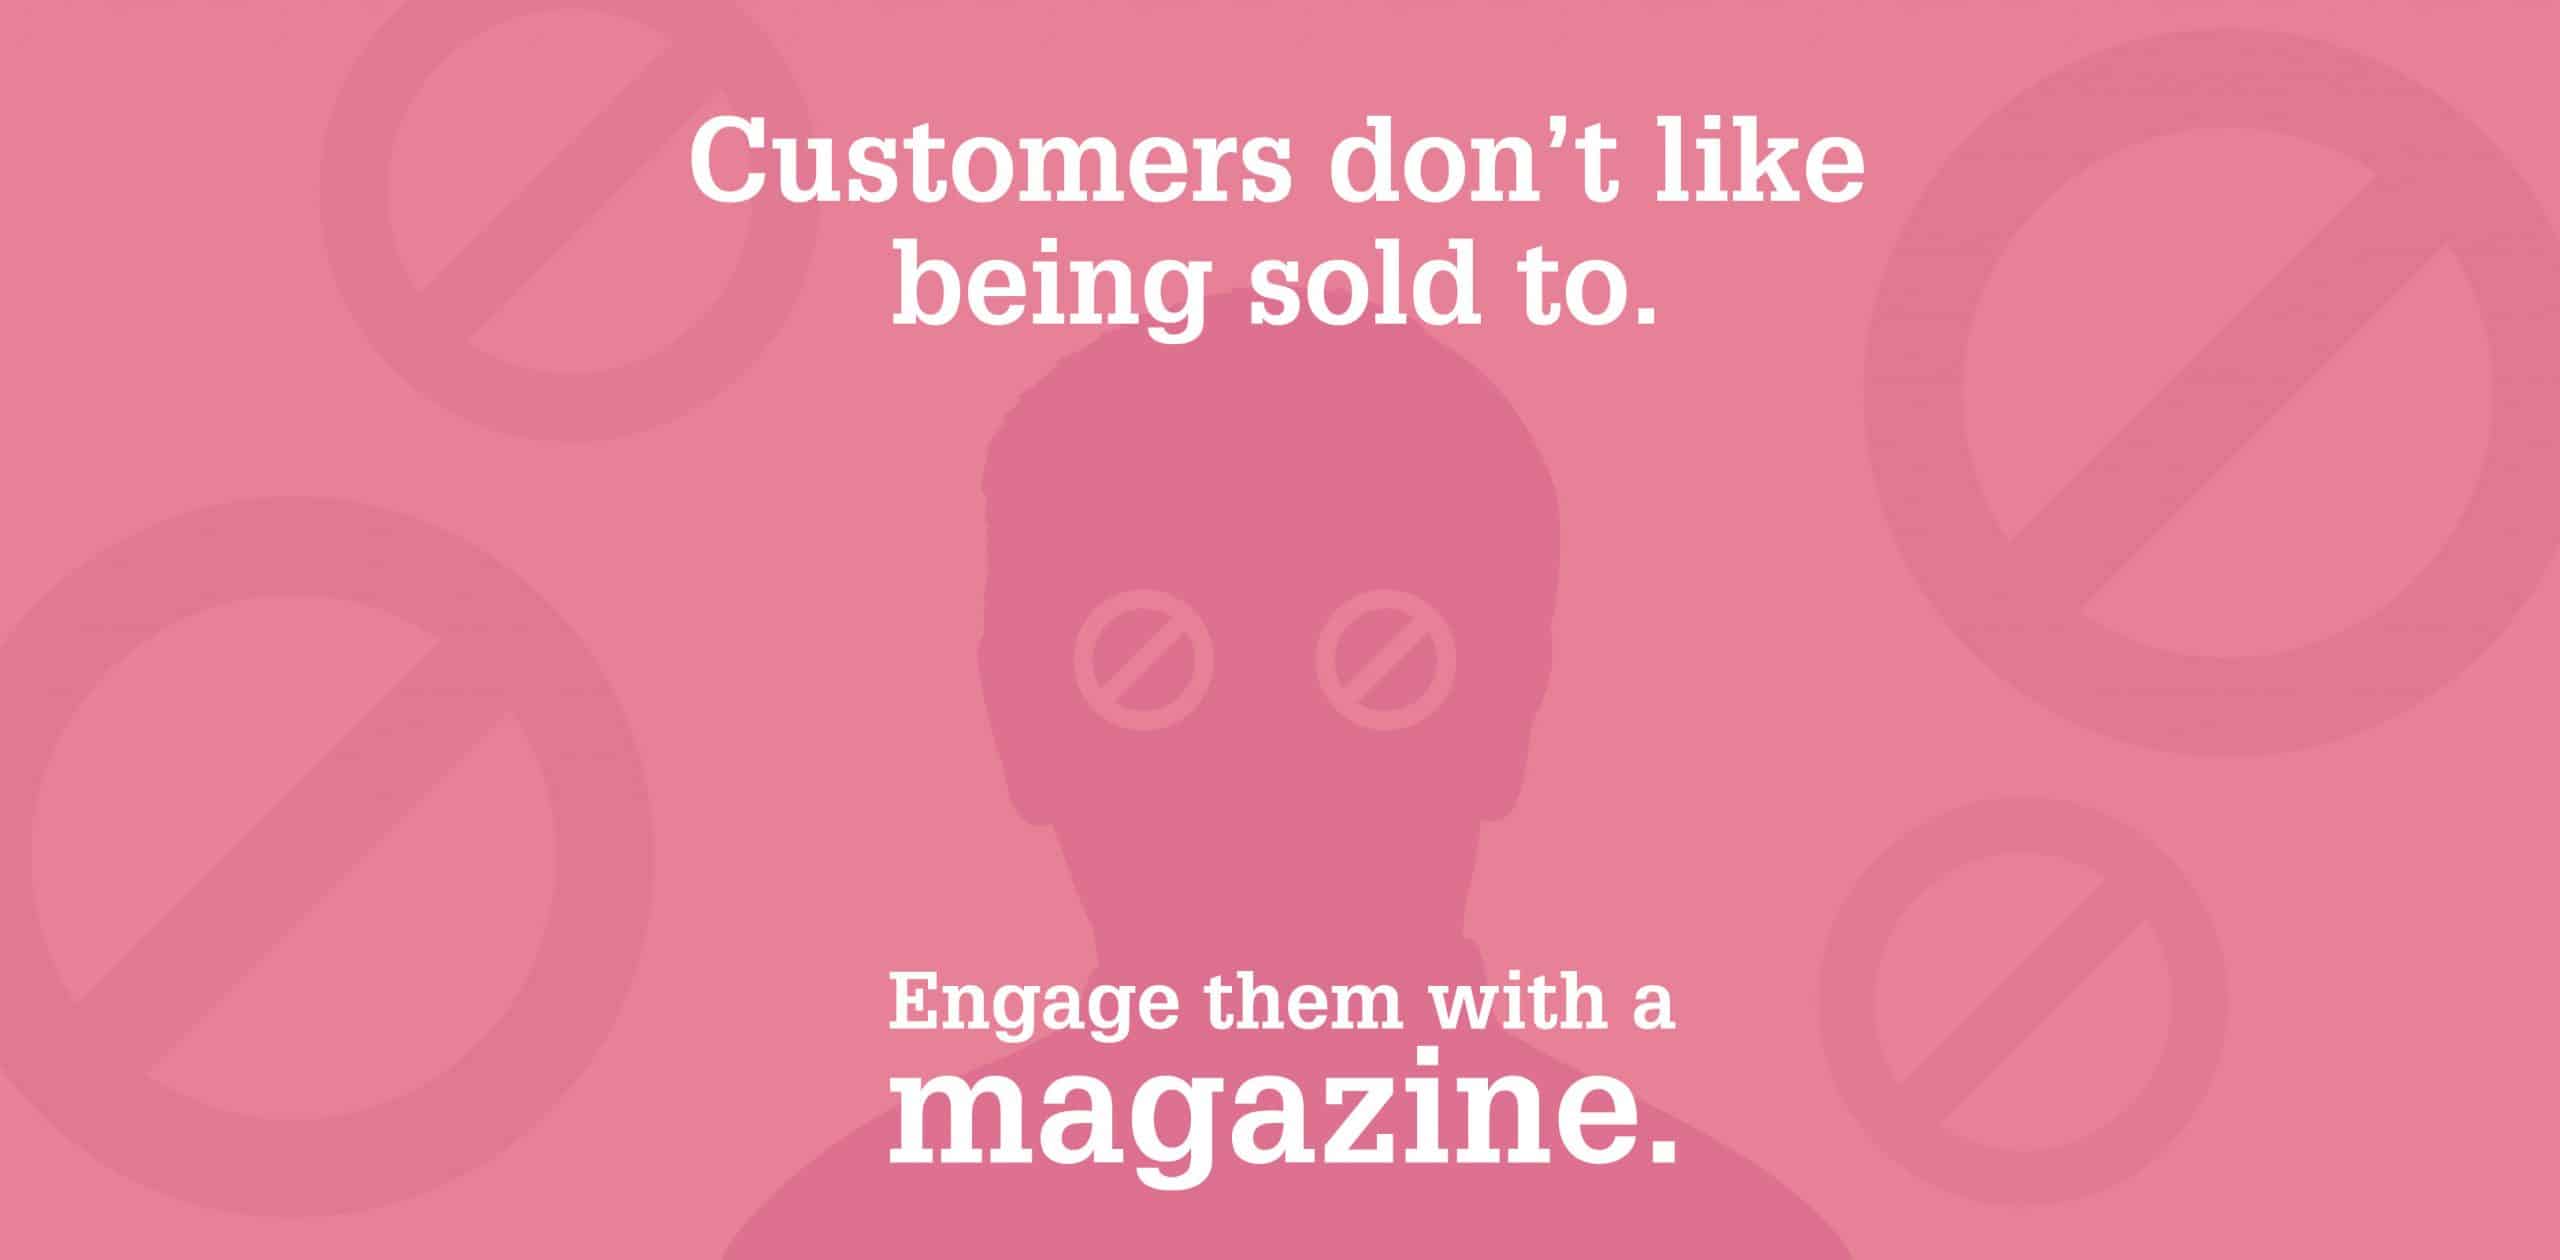 Customers dont like being sold to engage them with a magazine